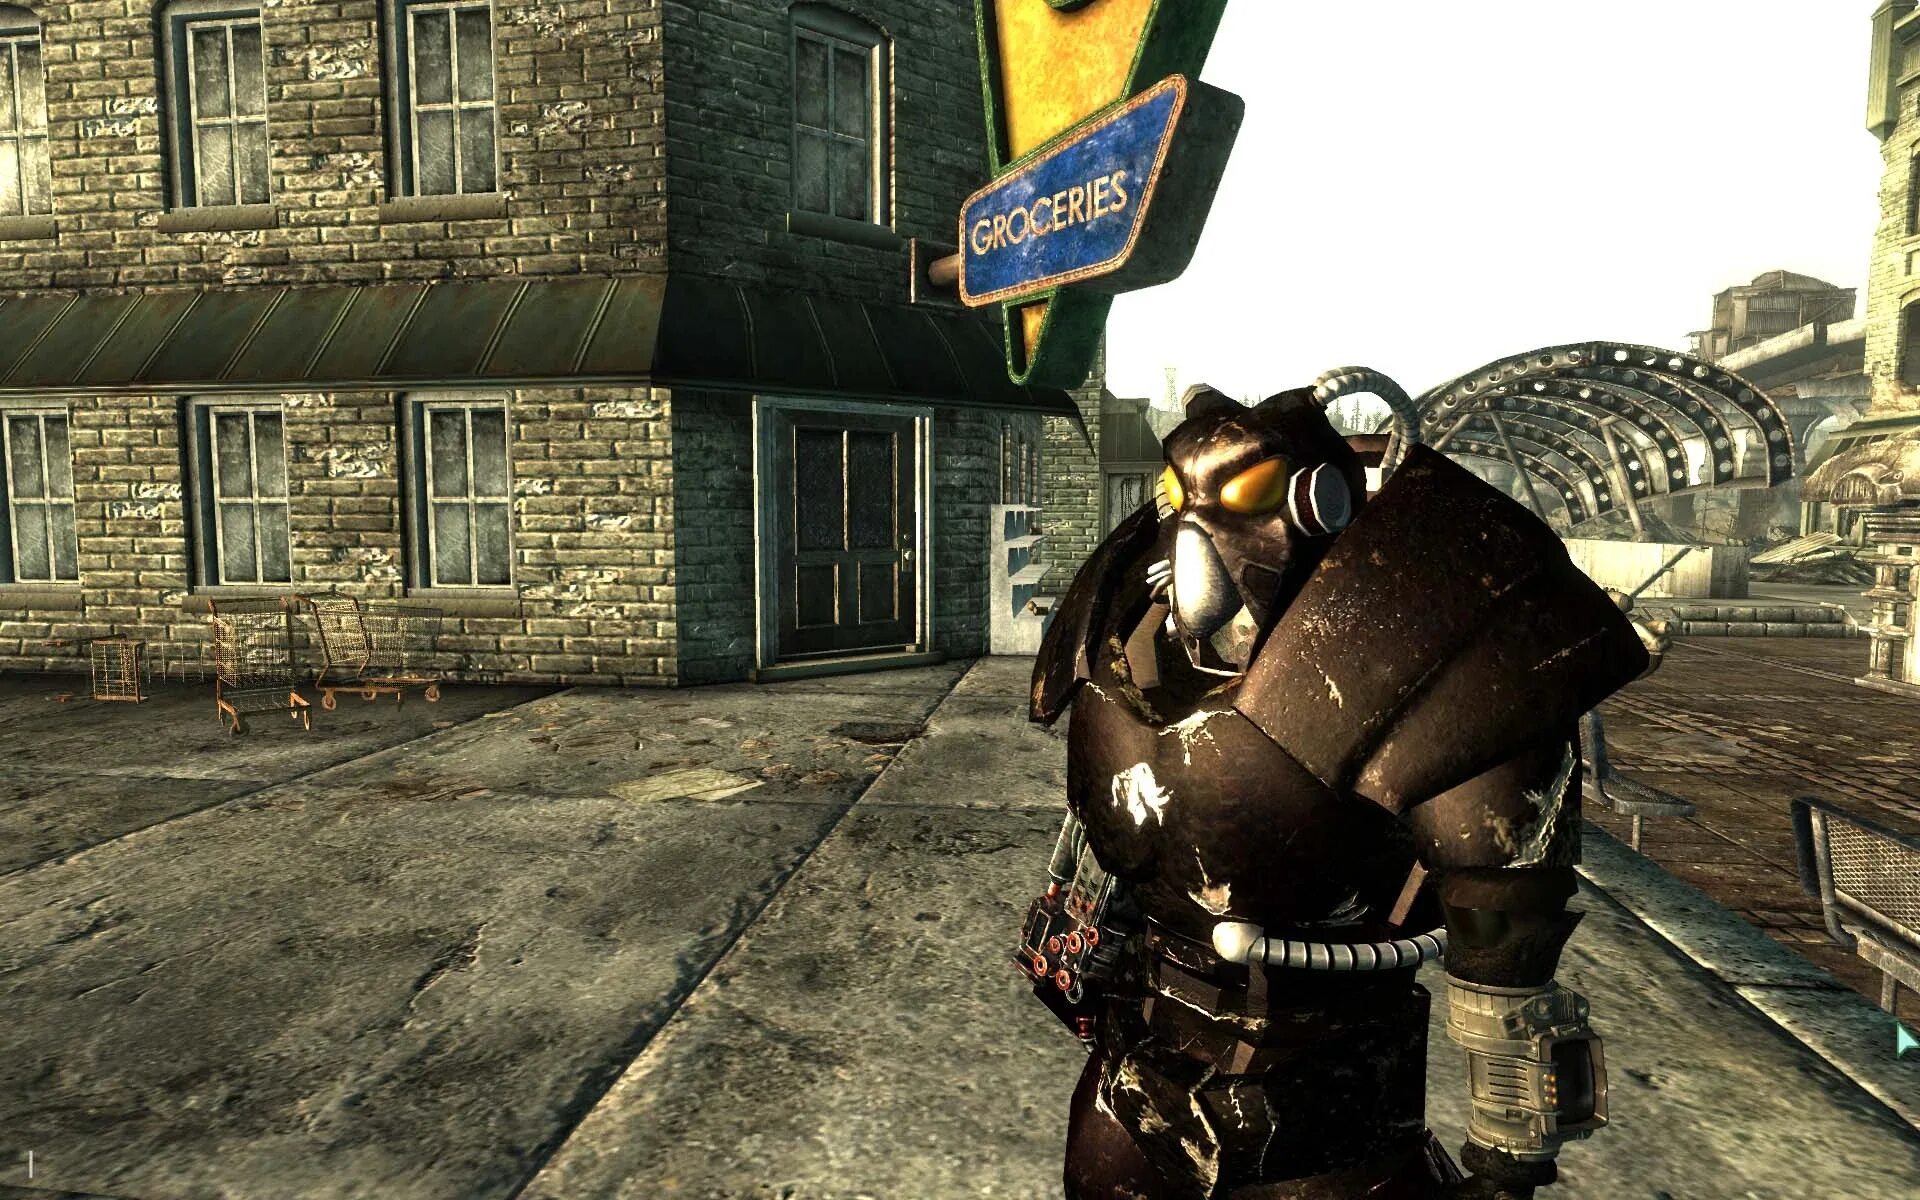 Fallout 3 ремастер. Fallout 3 Classic Armor. Power Armor Fallout 3 Intro. Fallout 3 Replacer Power Armor.